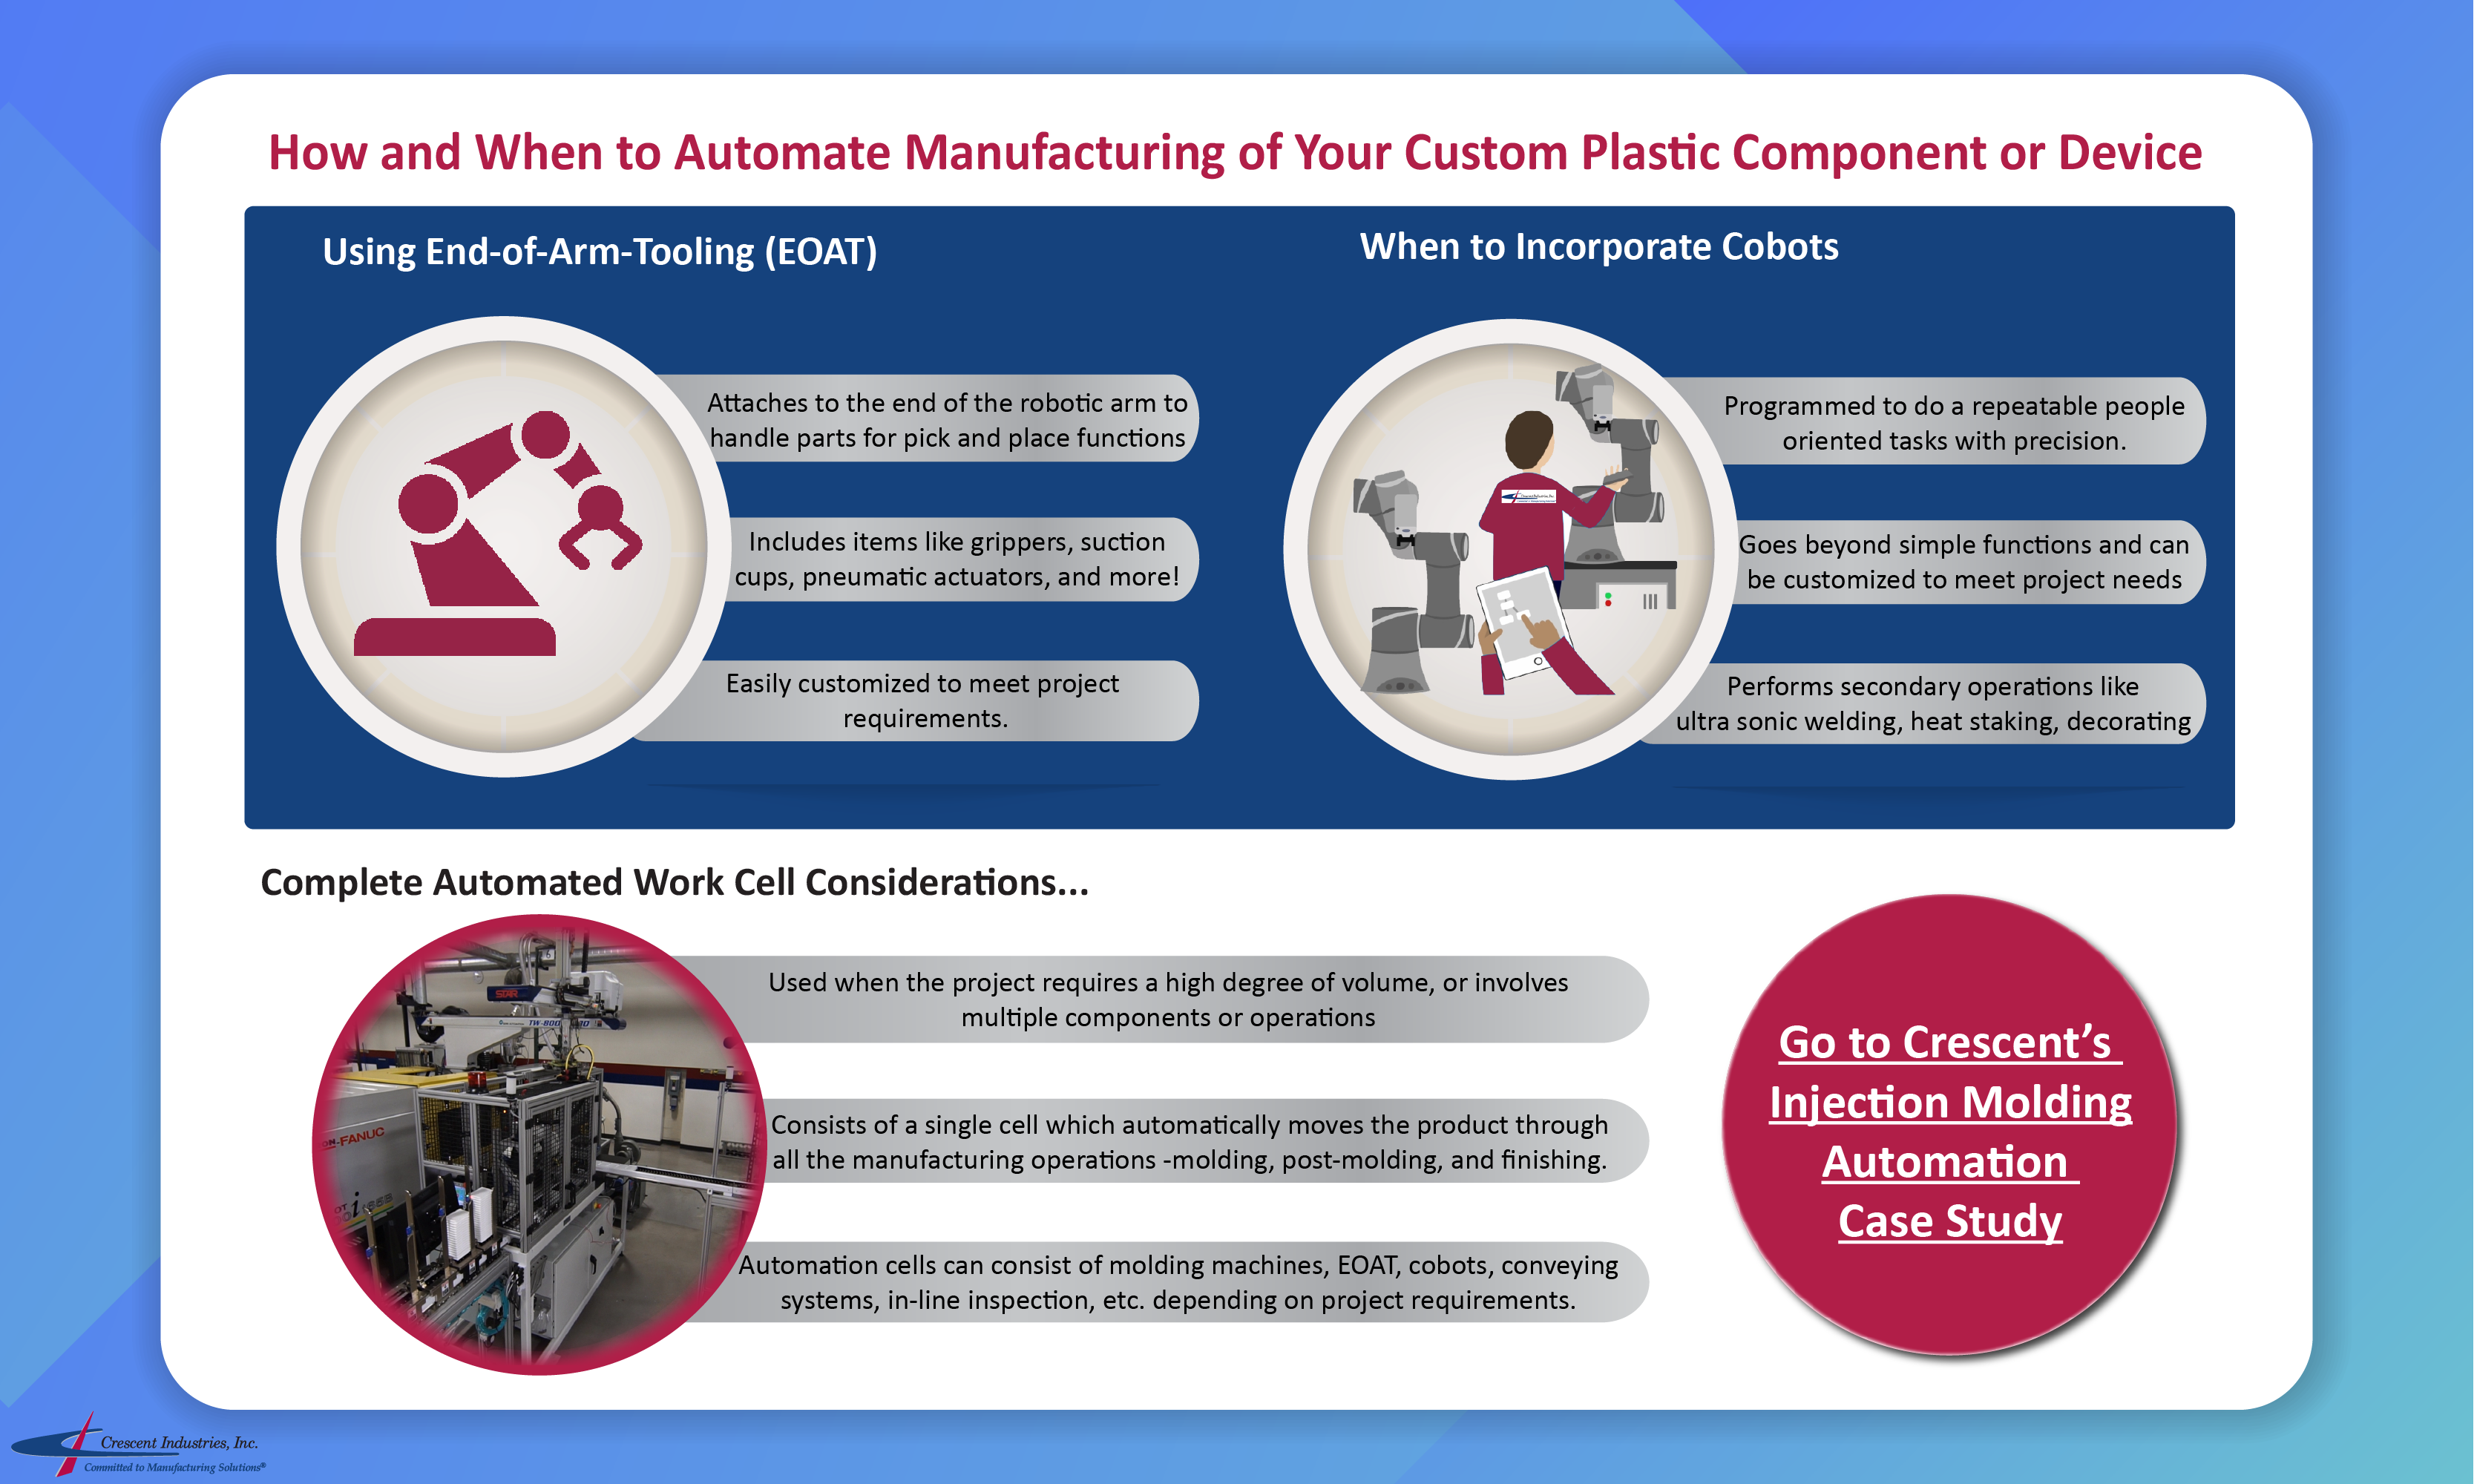 When to Automate Manufacturing of Plastic Component Infographic